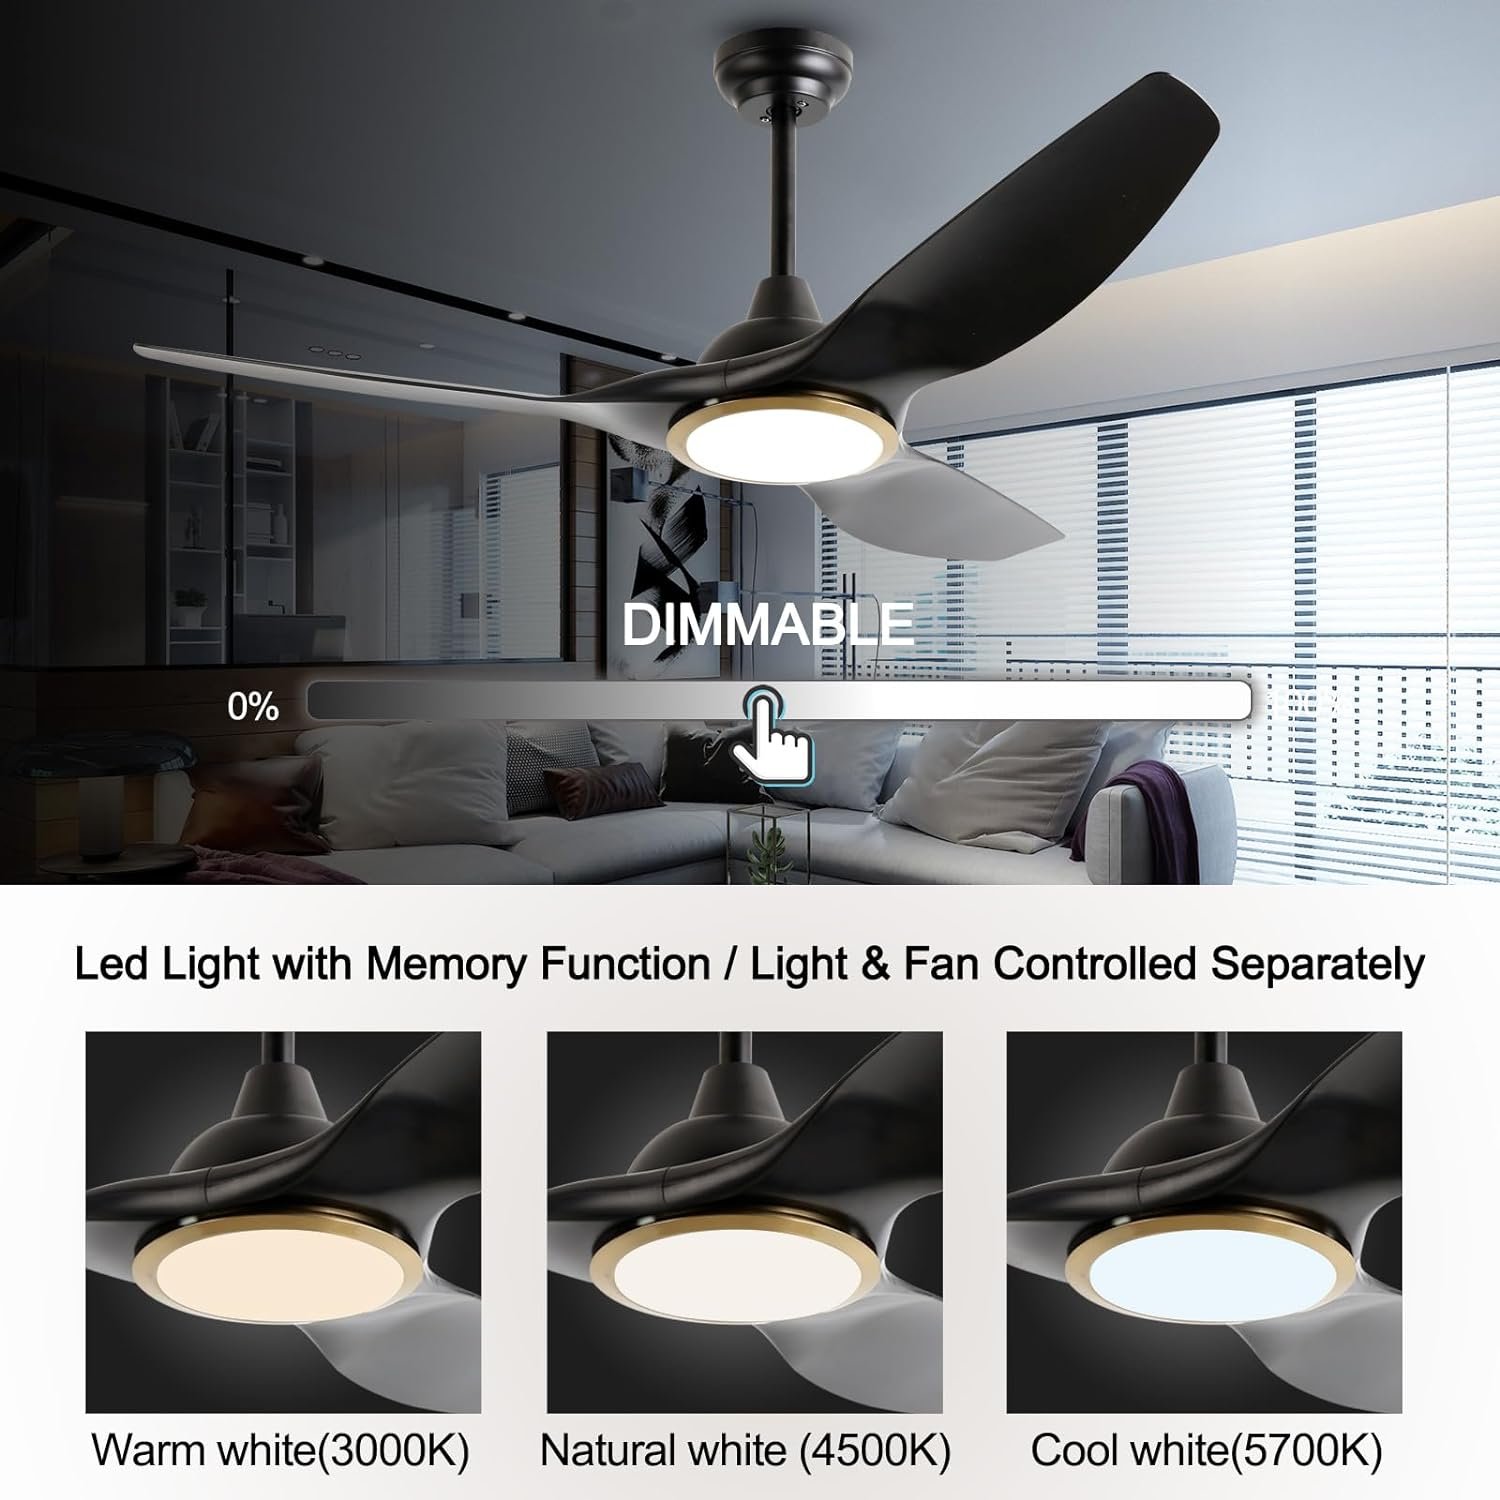 52 Inch 6 Speed High CFM Quiet DC Motor Modern Ceiling Fan with Lights Remote Control, 3 Blade White Gold Indoor Bedroom Living Room Ceiling Fan